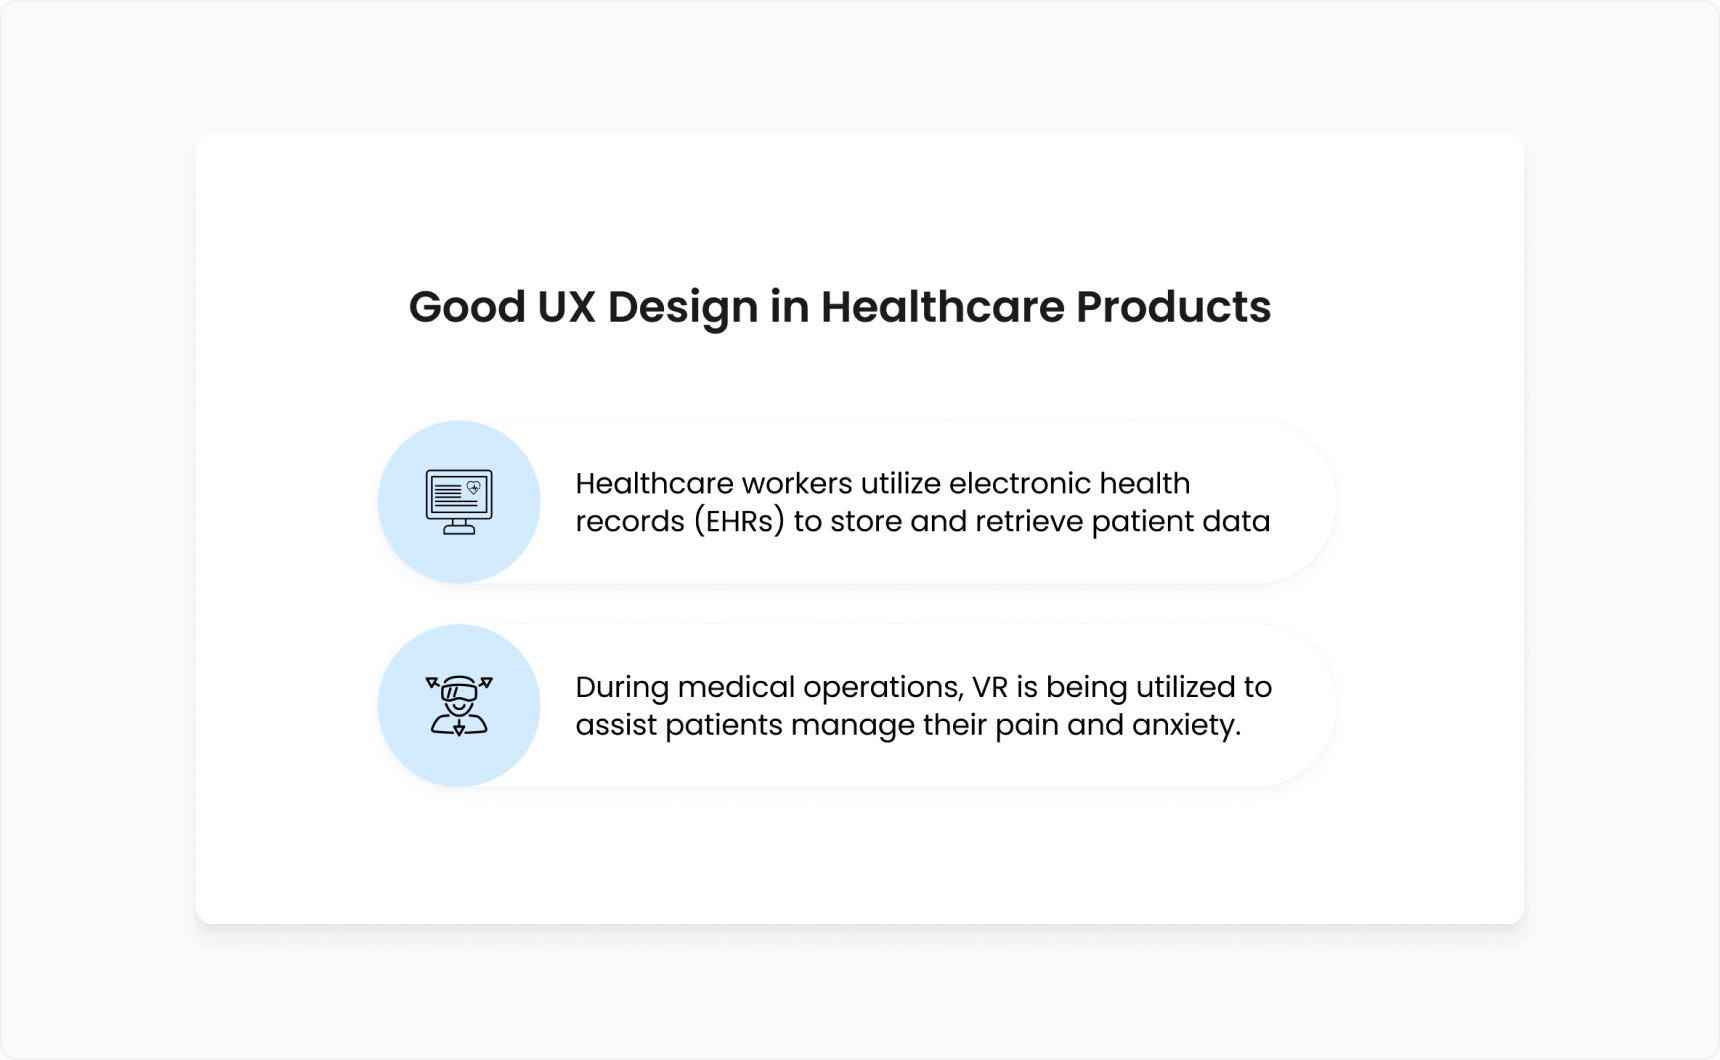 Good UX Design in Healthcare Products